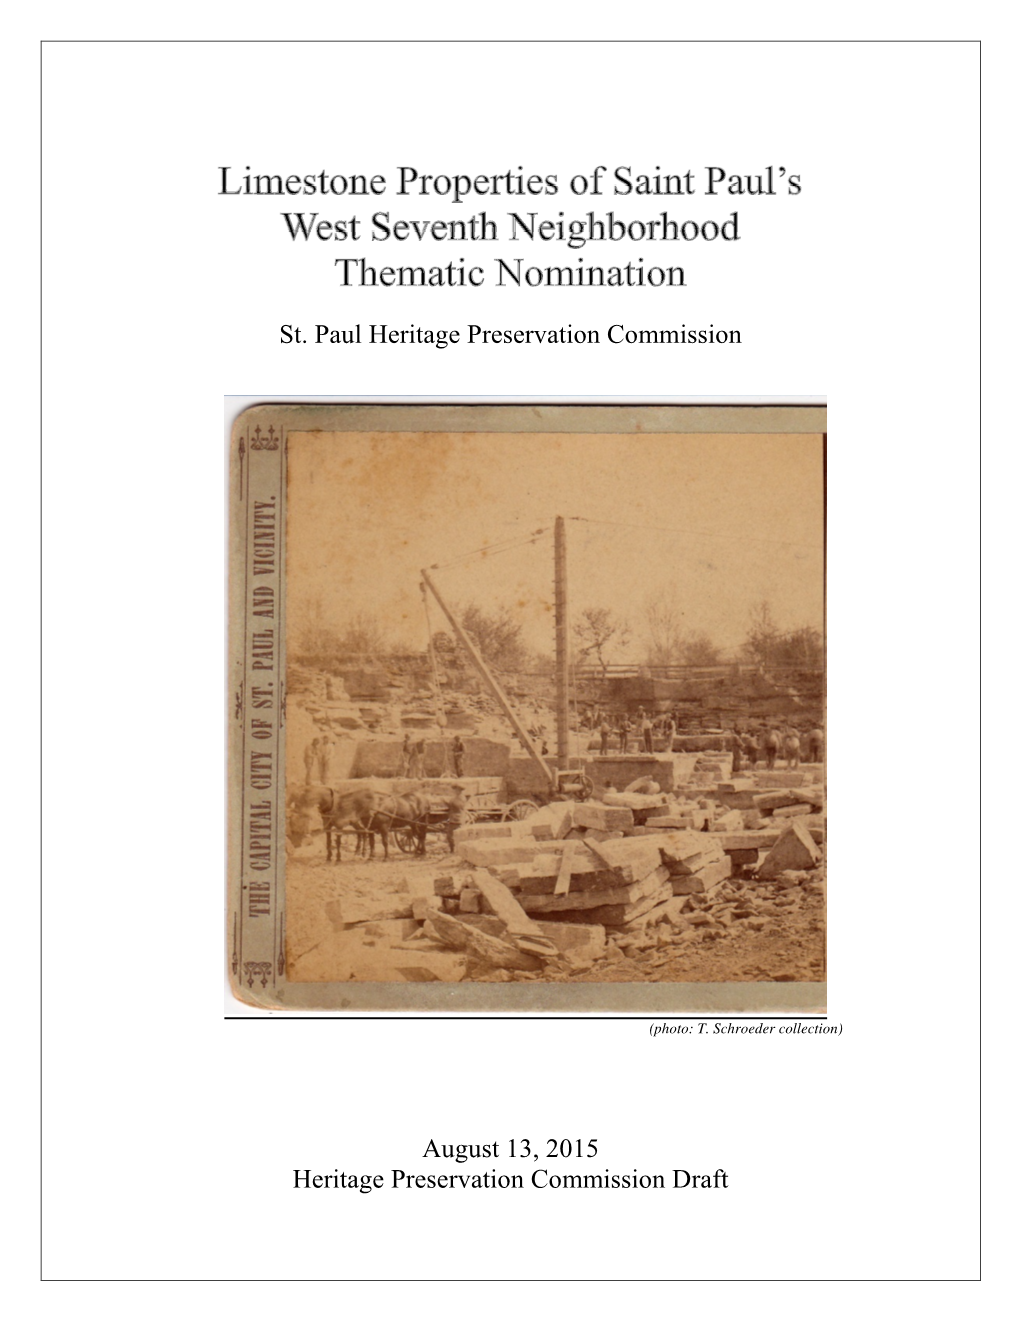 St. Paul Heritage Preservation Commission August 13, 2015